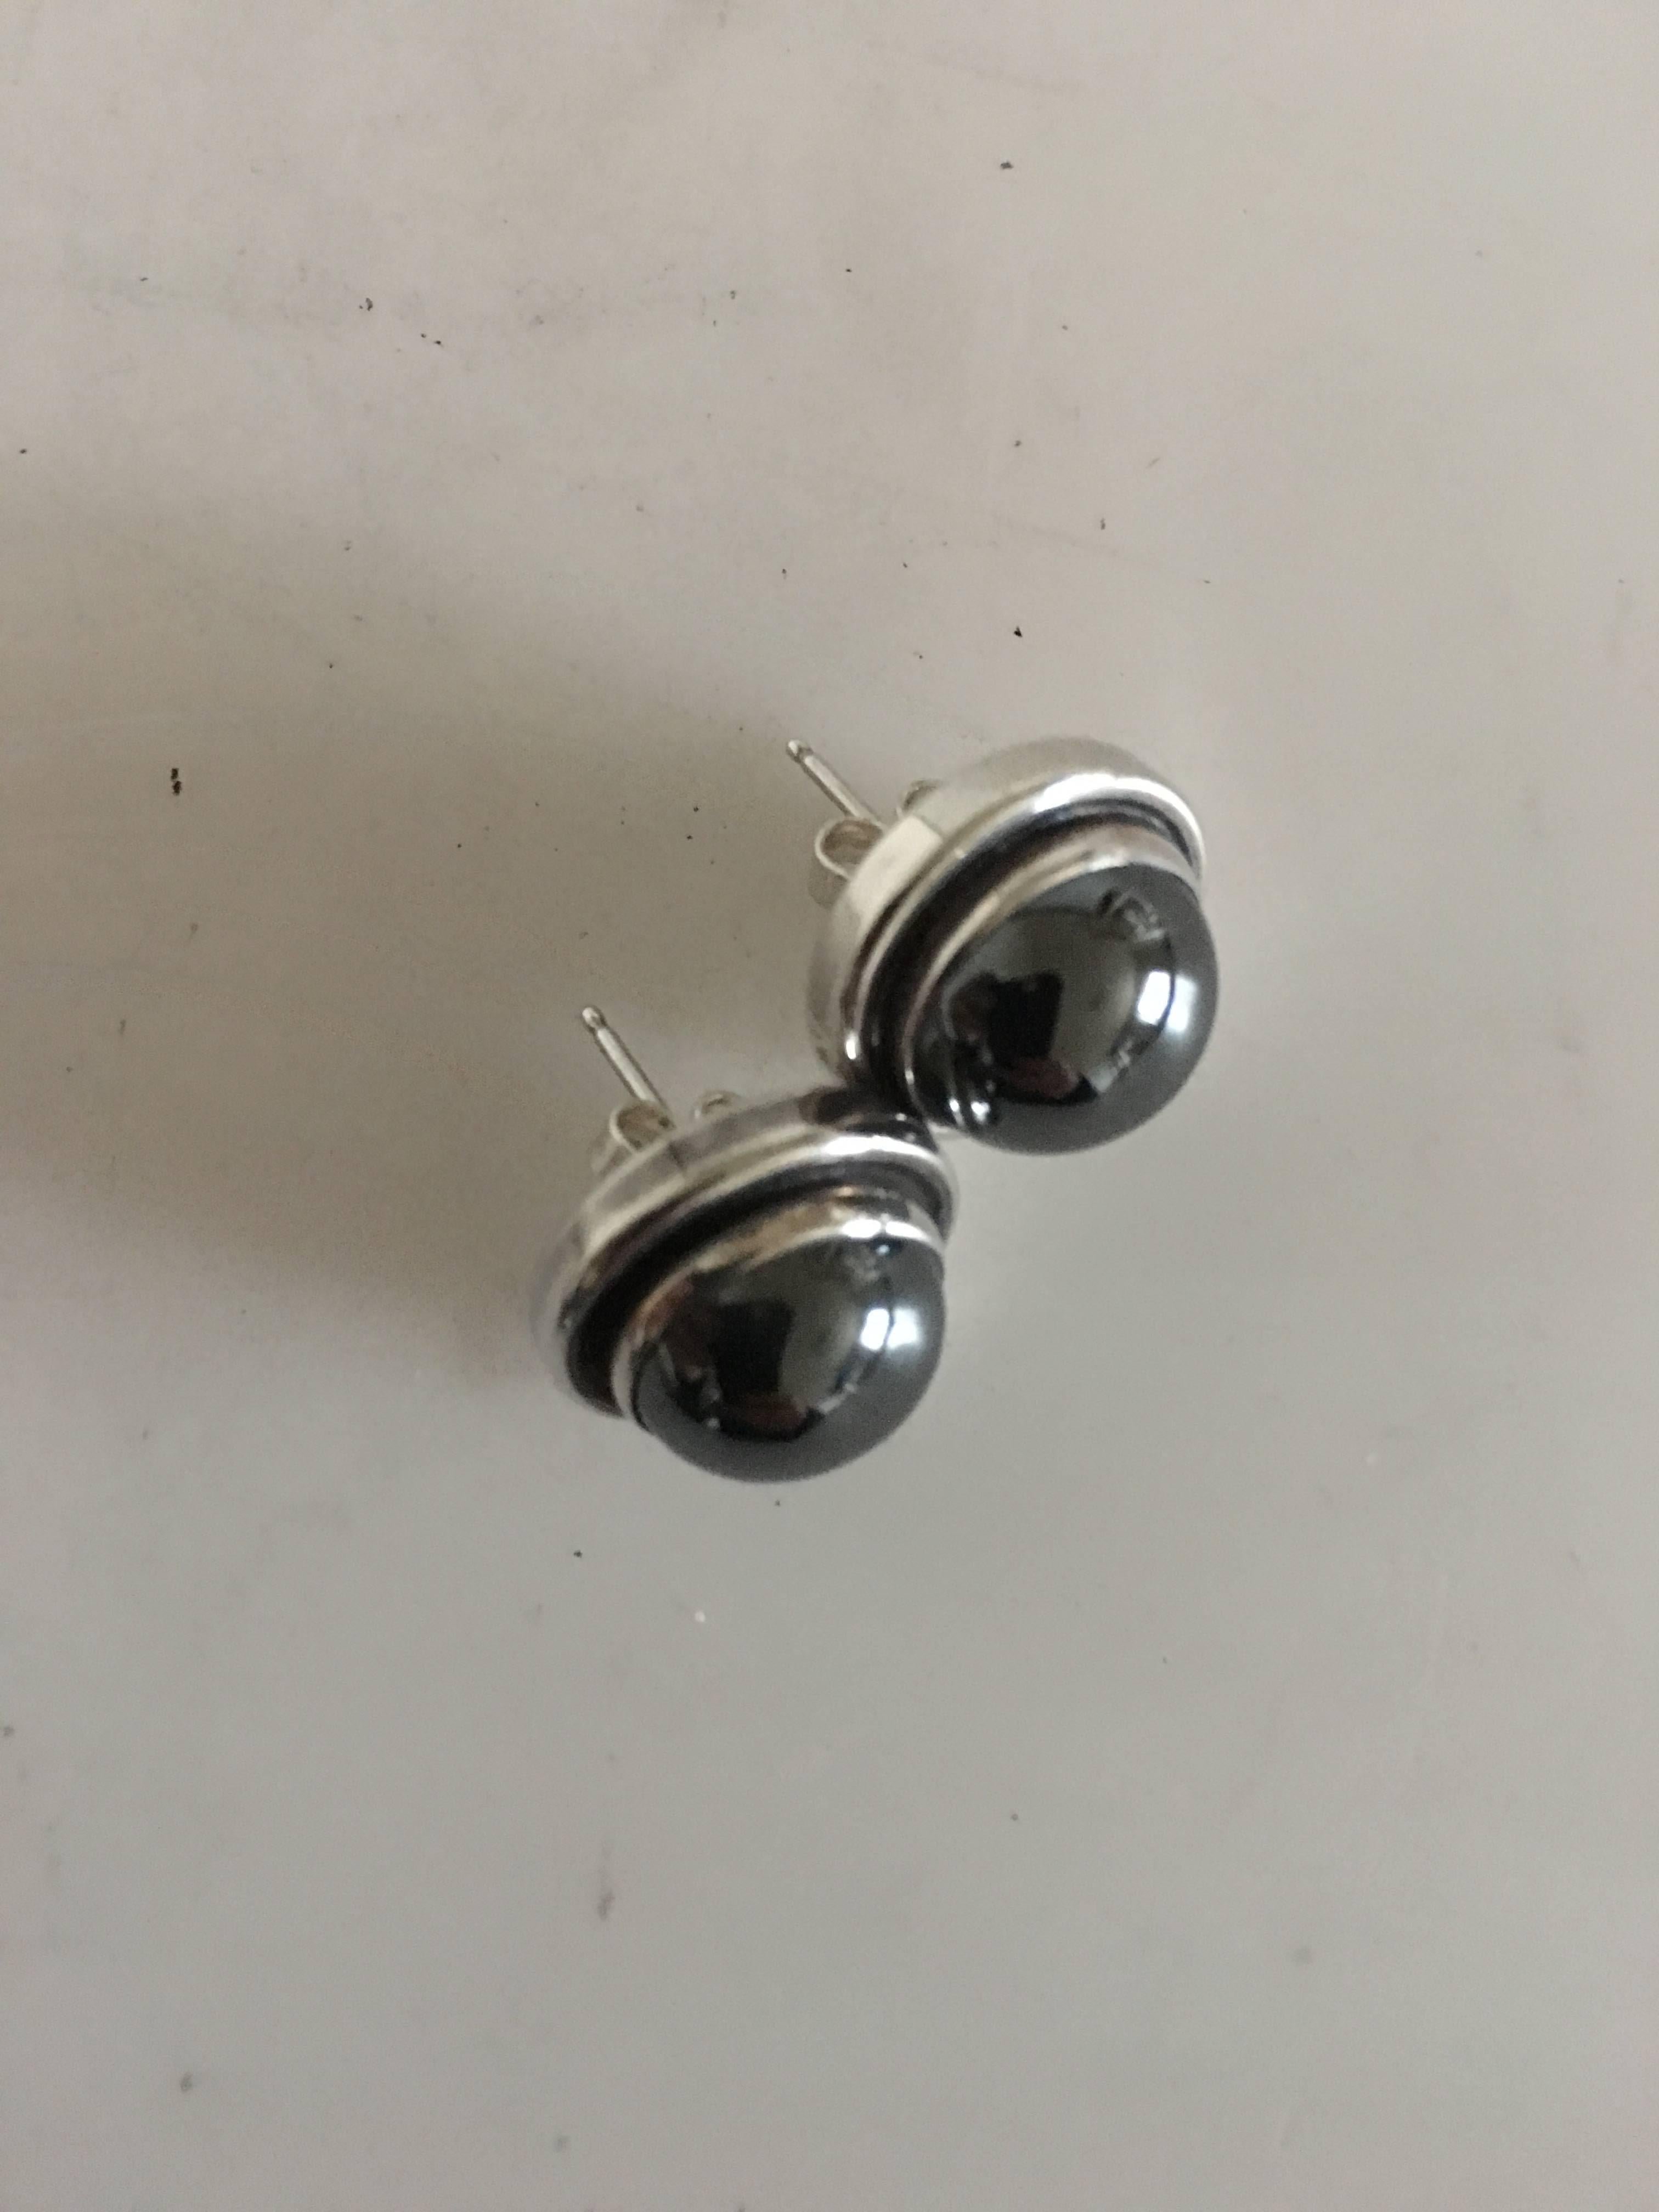 Georg Jensen sterling silver earrings #86D with hematite stone. Measures 1.2 cm diameter (0 15/32"). Combined weight is 12 grams (0.40 oz). From after 1945.